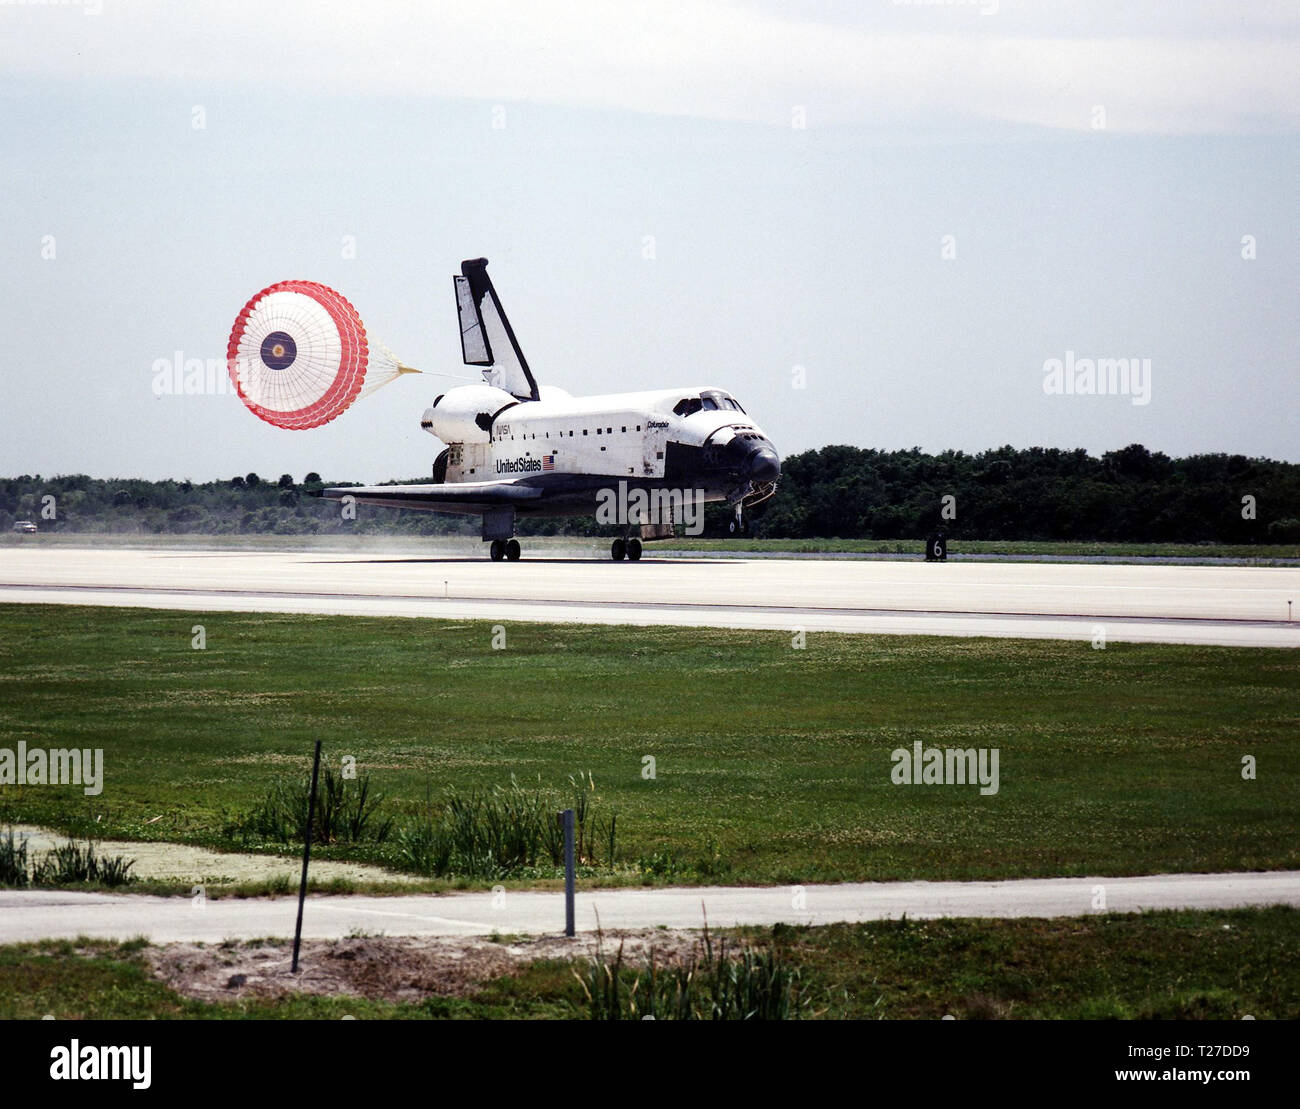 KENNEDY SPACE CENTER, FLA. -- With drag chute deployed, the Space Shuttle Columbia hurtles down Runway 33 at KSC's Shuttle Landing Facility to conclude the Microgravity Science Laboratory-1 (MSL-1) mission. With main gear touchdown at 2:33:11 p.m. EDT, April 8, the STS-83 mission duration was 3 days, 23 hours, 12 minutes. Stock Photo